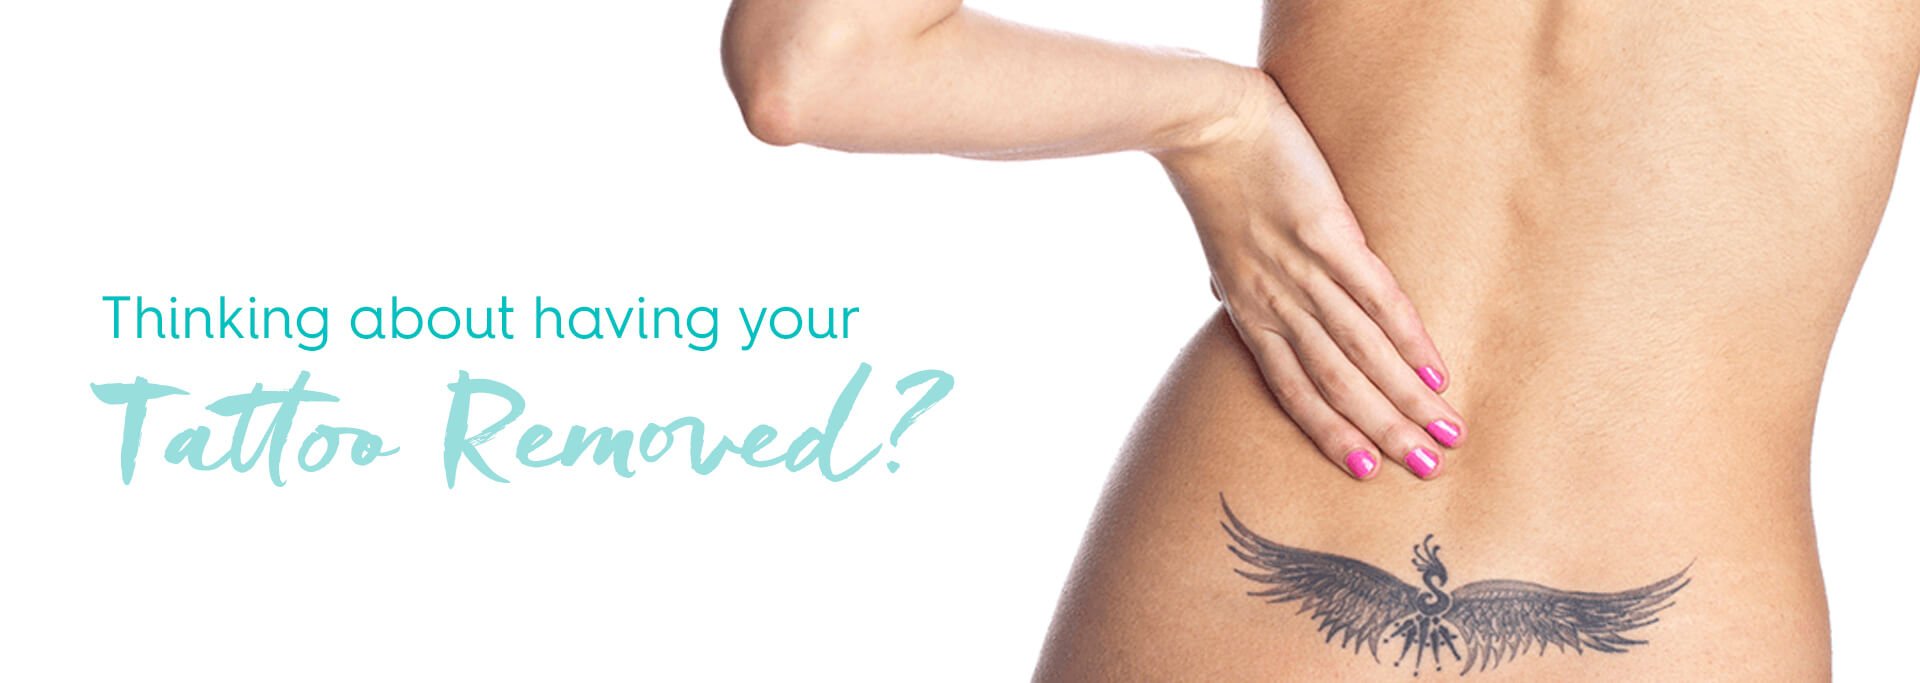 Miami Laser Tattoo Removal | Cost & Info | Arviv Medical Aesthetics